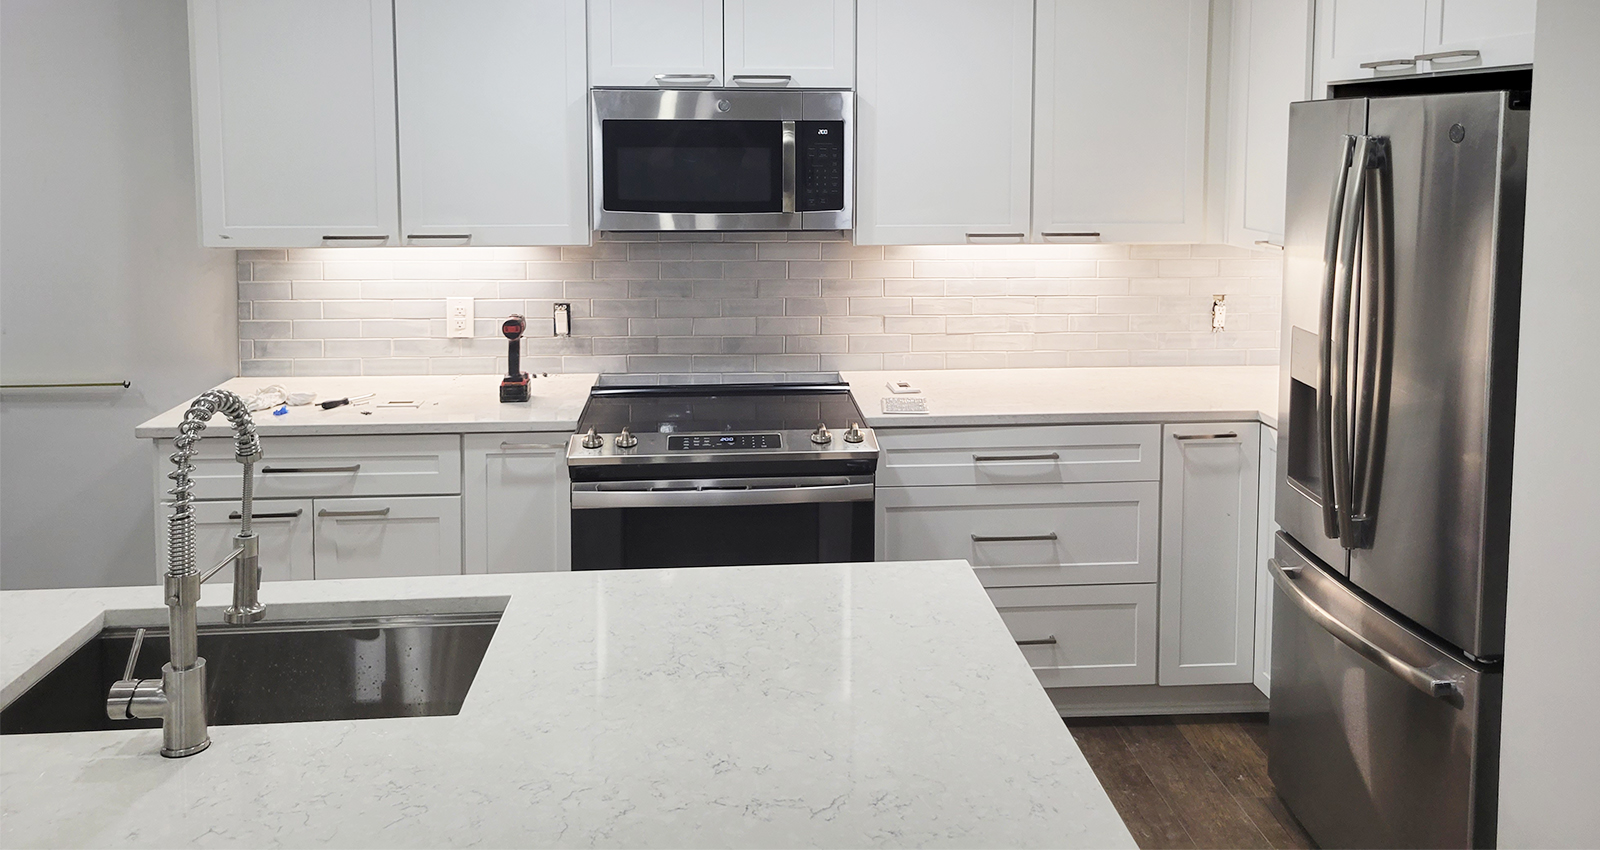 Greenwood, Indiana Kitchen remodel - white kitchen cabinets with white quartz countertops and stainless steel appliances